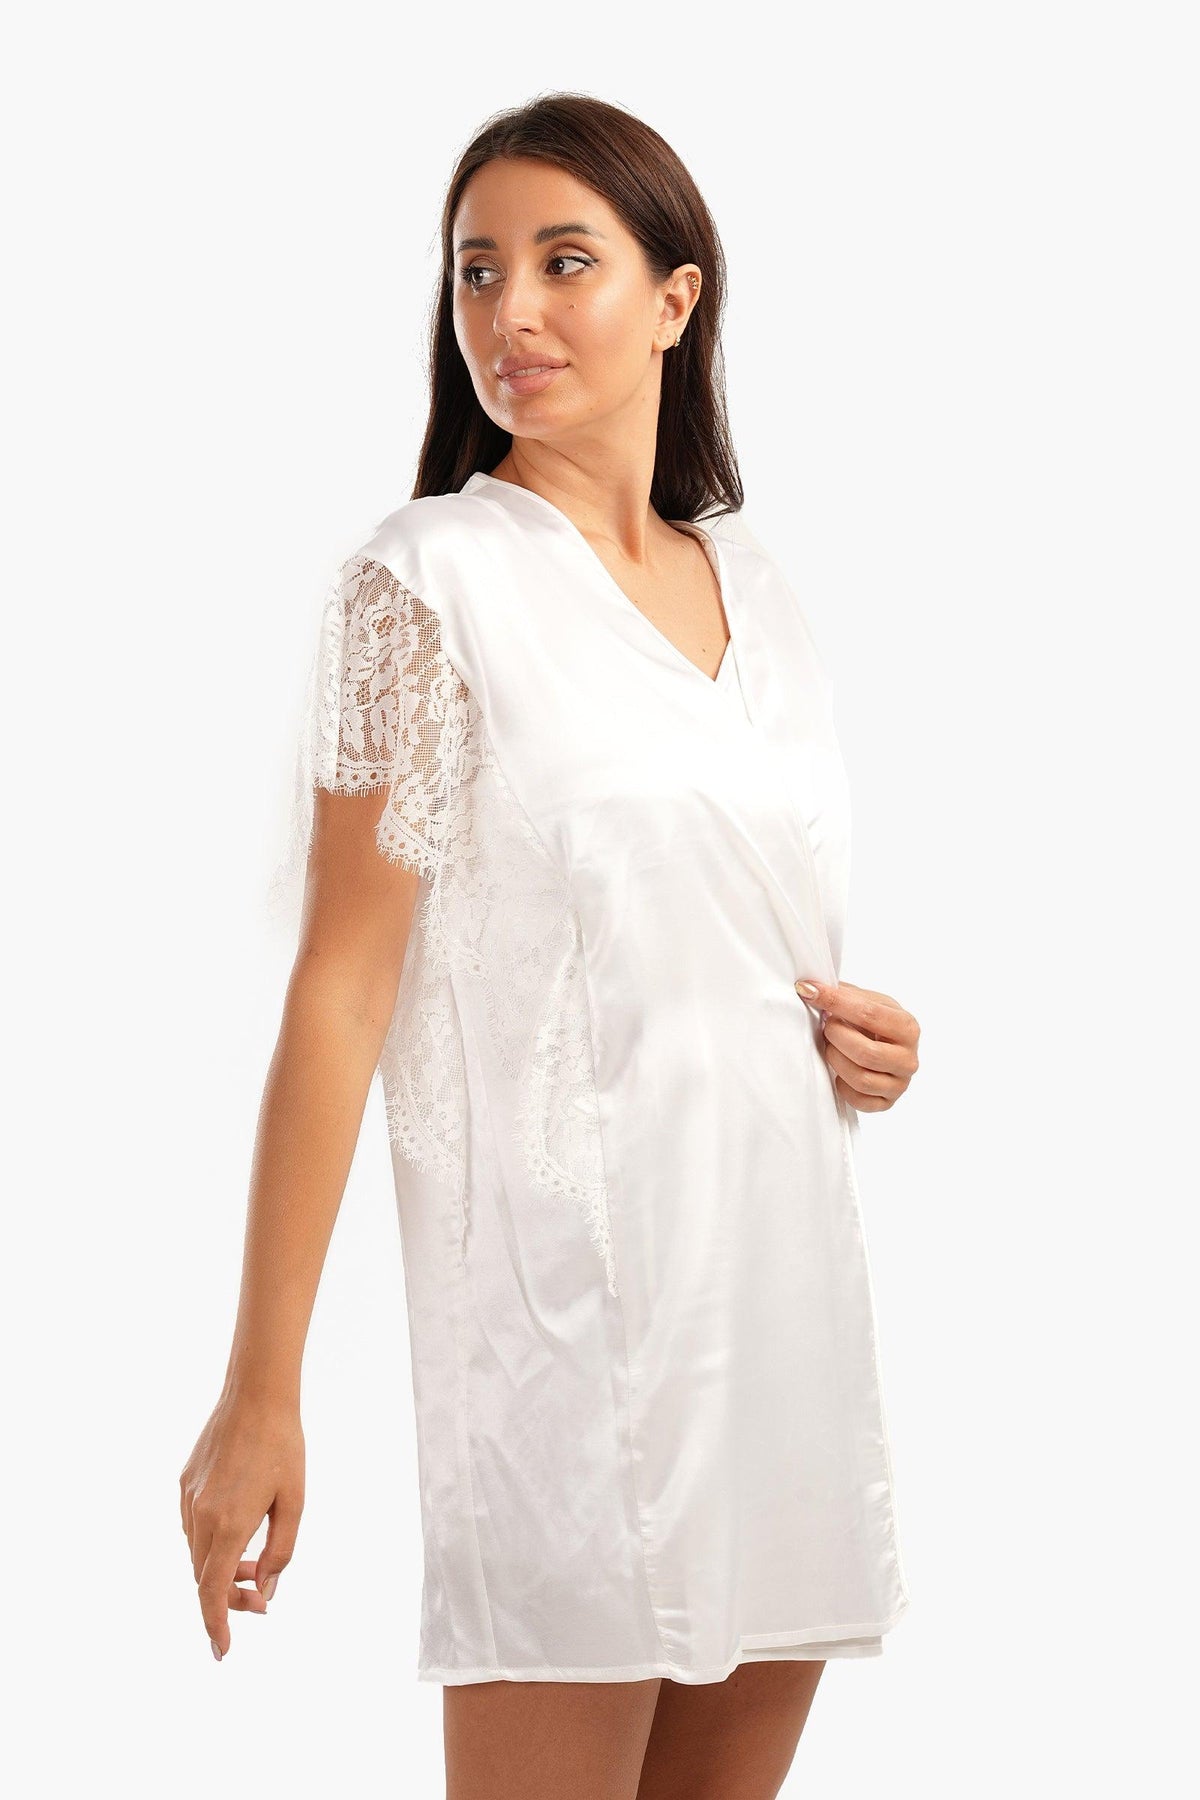 Robe with Lace Short Sleeves - Carina - كارينا